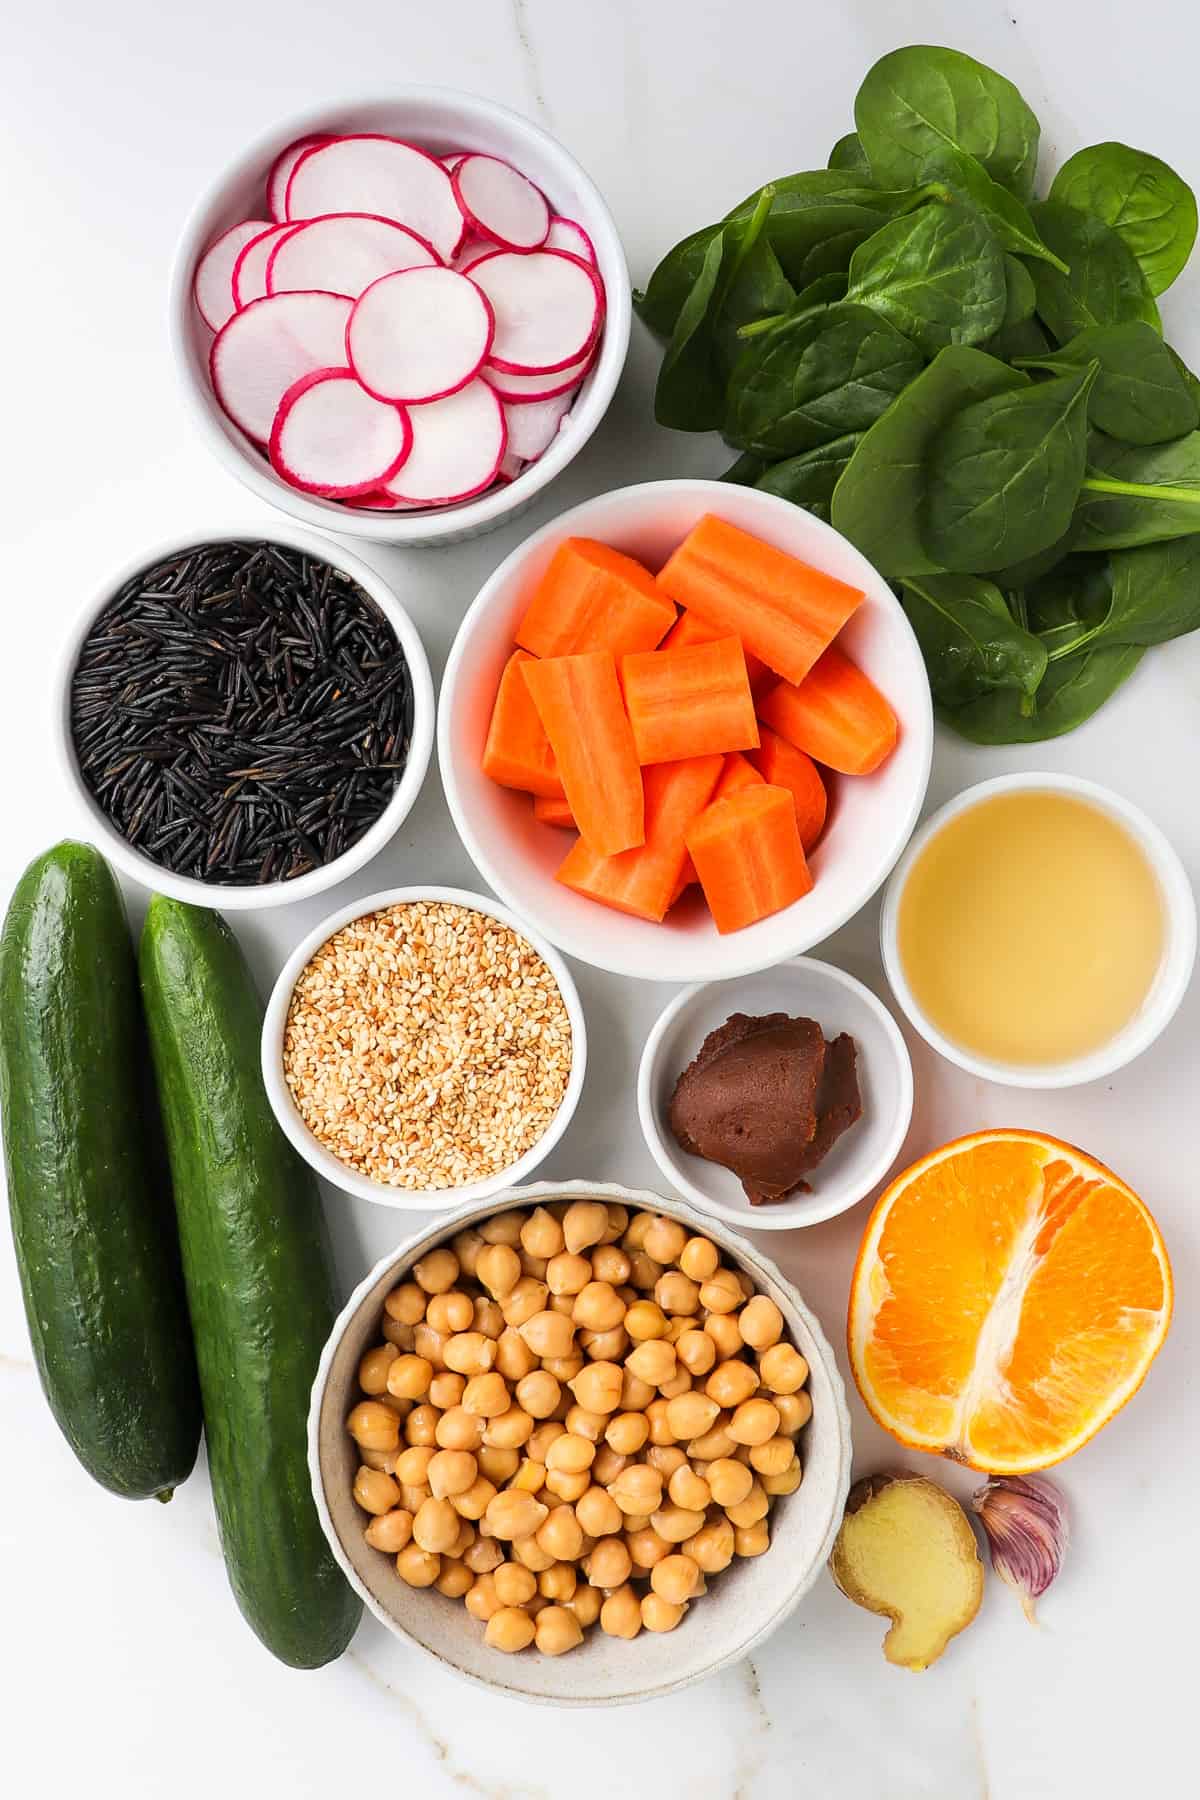 Ingredients shown to make the salad and dressing.